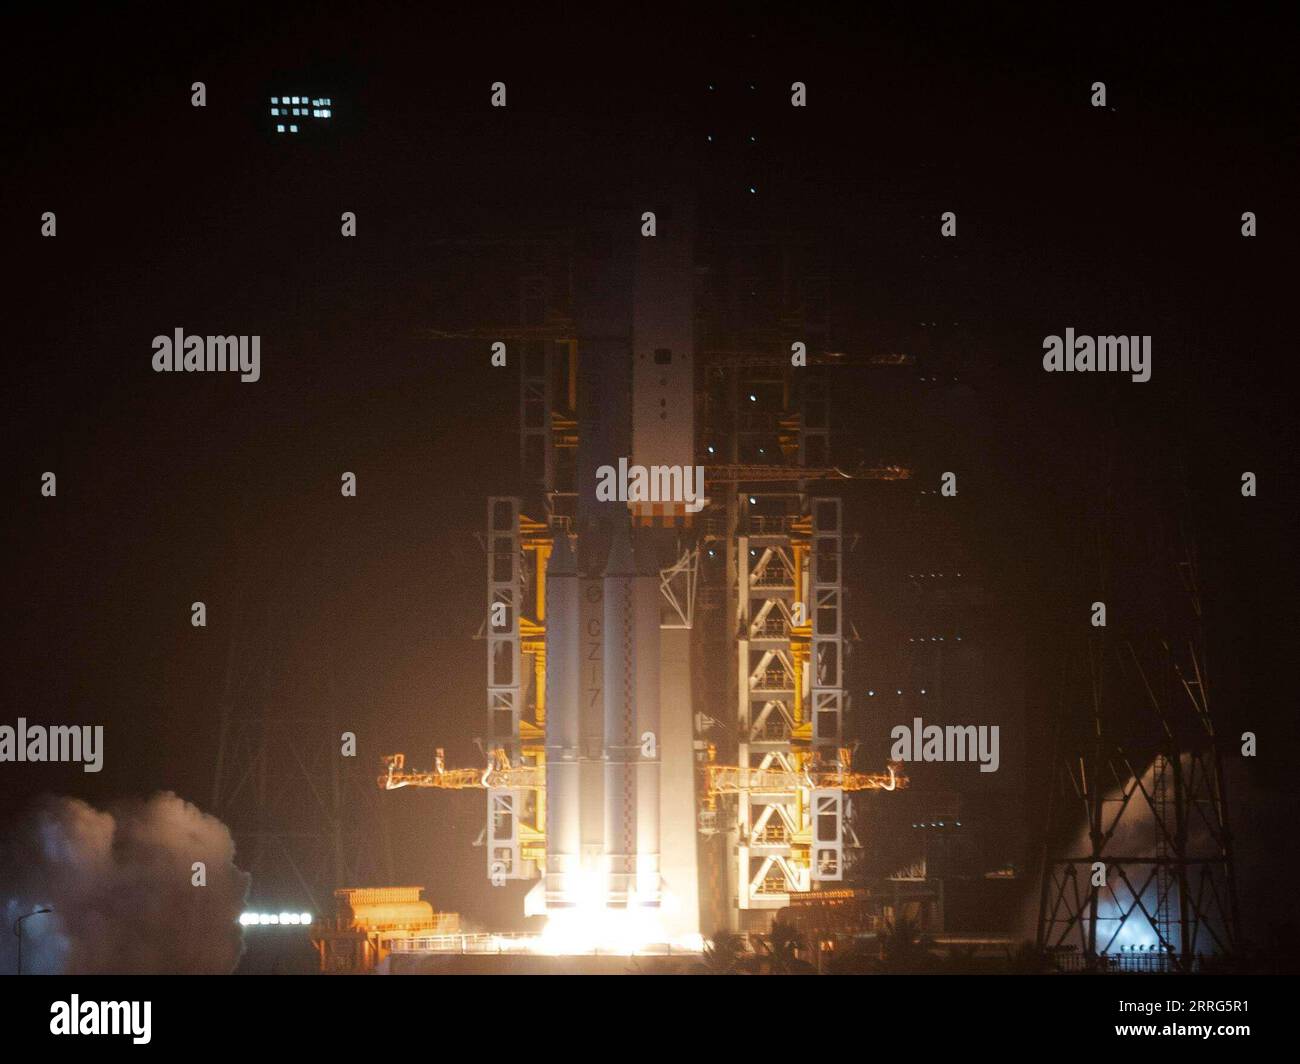 220510 -- WENCHANG, May 10, 2022 -- The Long March-7 Y5 rocket, carrying Tianzhou-4, blasts off from the Wenchang Spacecraft Launch Site in south China s Hainan Province, May 10, 2022. China launched cargo spacecraft Tianzhou-4 on Tuesday to deliver supplies for its space station which is scheduled to wrap up construction this year.  EyesonSciCHINA-HAINAN-TIANZHOU-4-CARGO SPACECRAFT-LAUNCH CN TianxDingyu PUBLICATIONxNOTxINxCHN Stock Photo